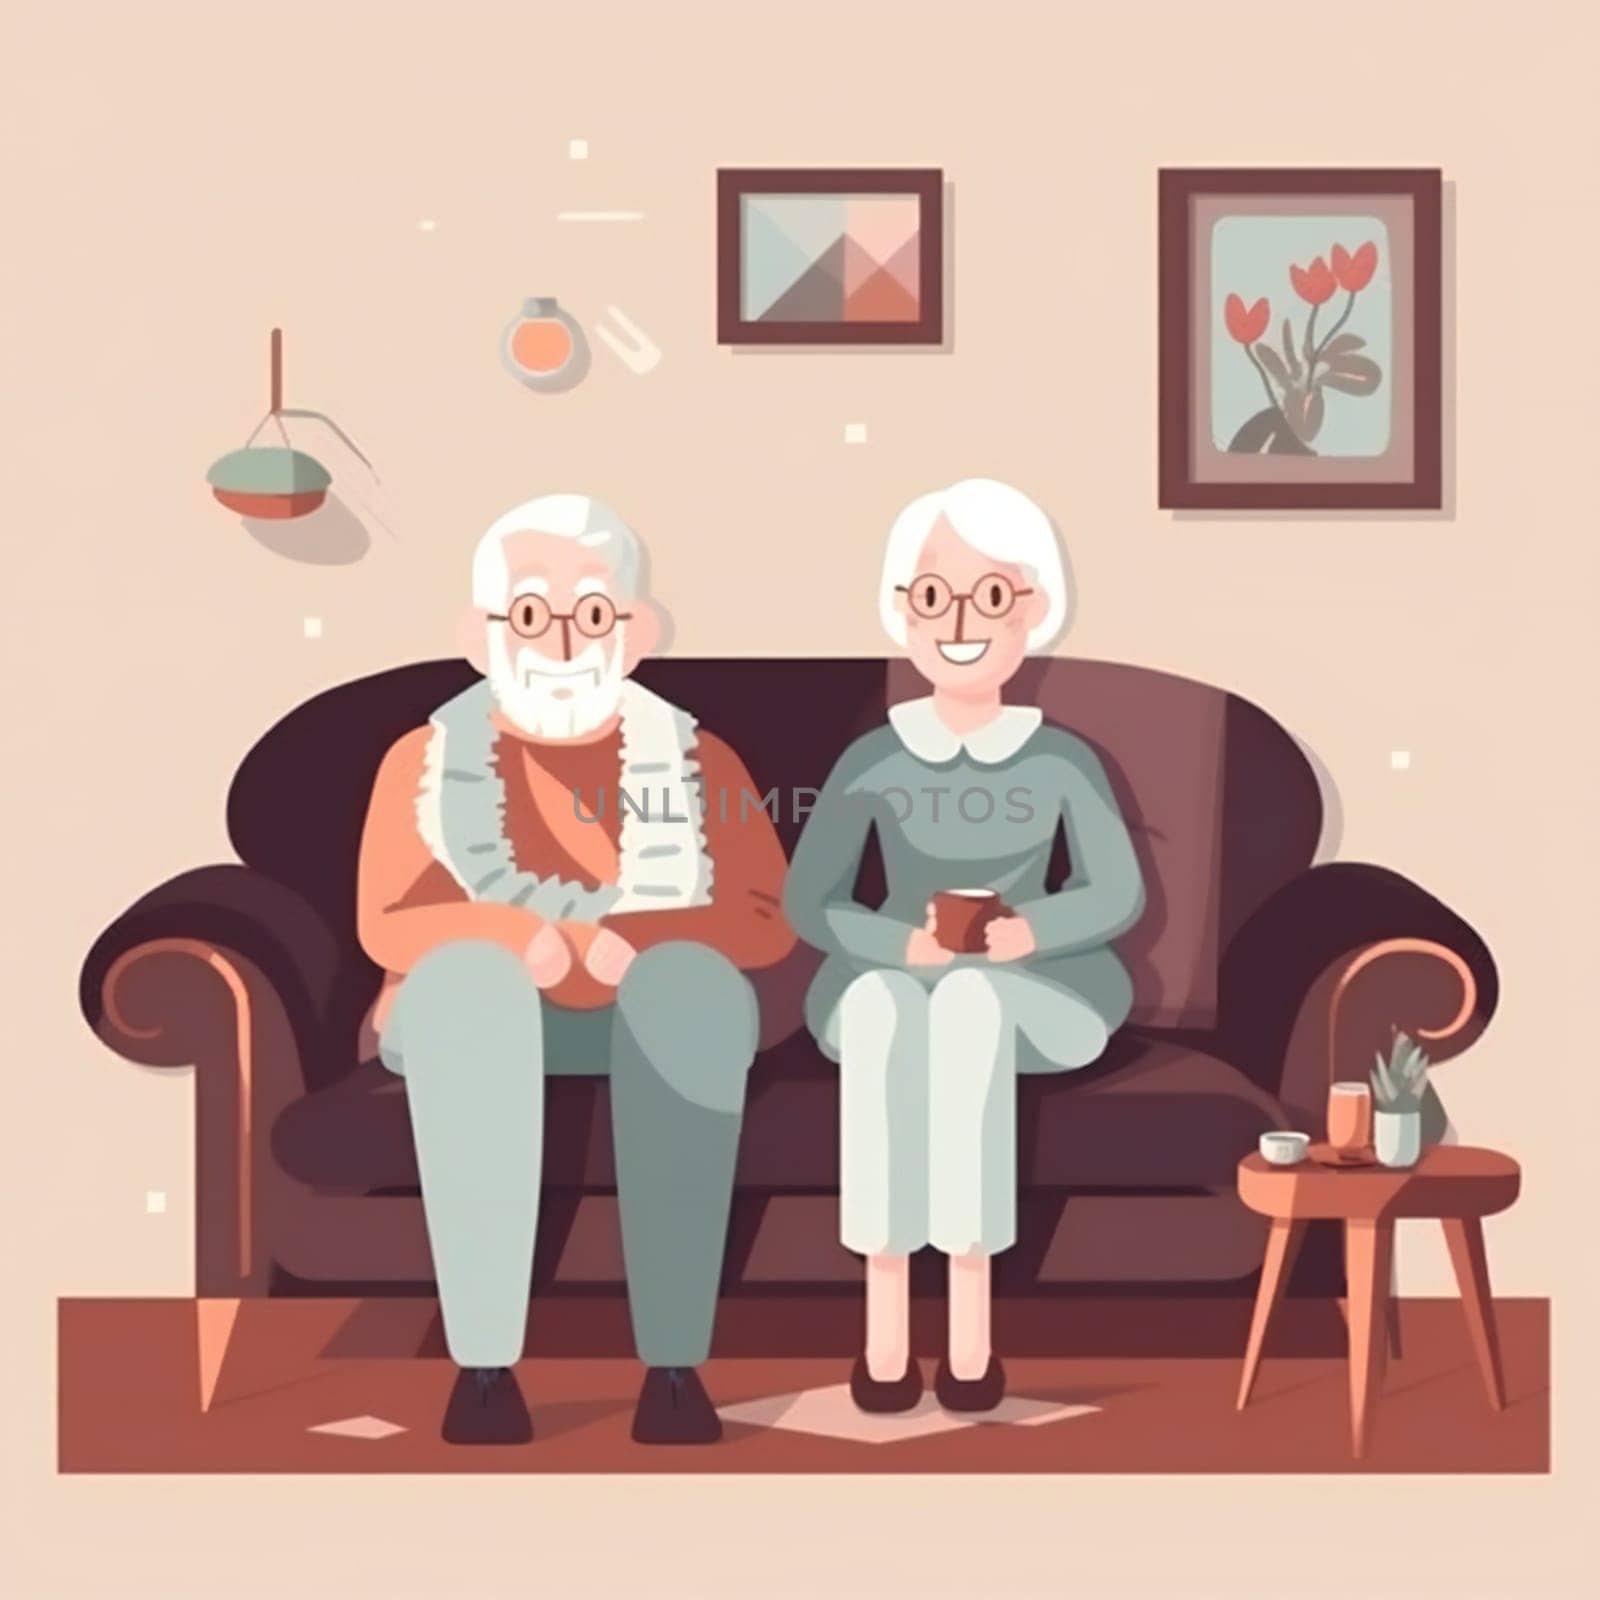 Social concept - old people couple. Happy senior man woman family sitting on the sofa and rest